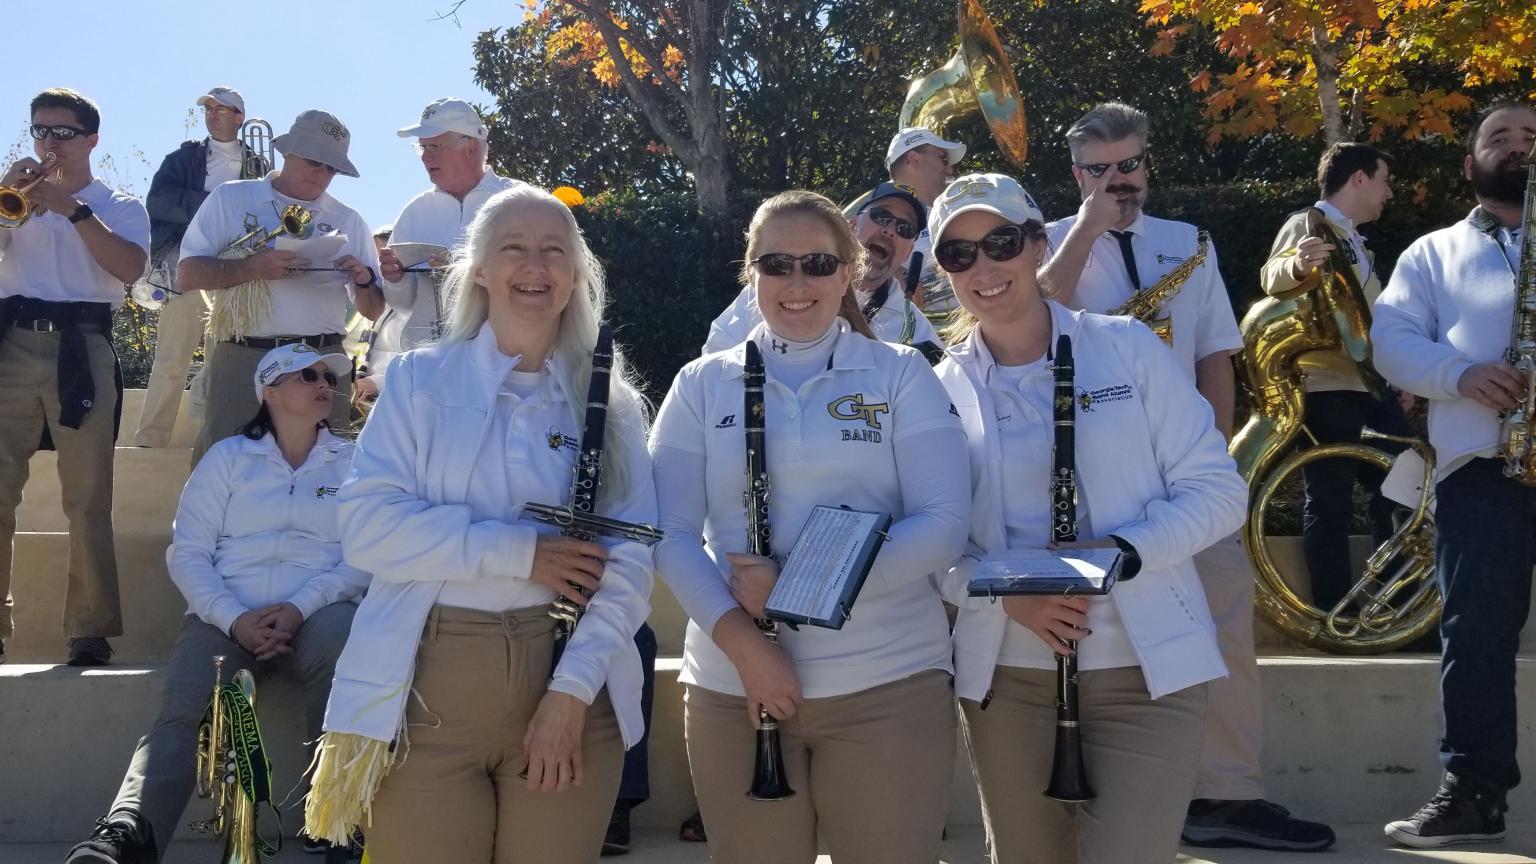 A group of Marching Band alumni pose before a performance.